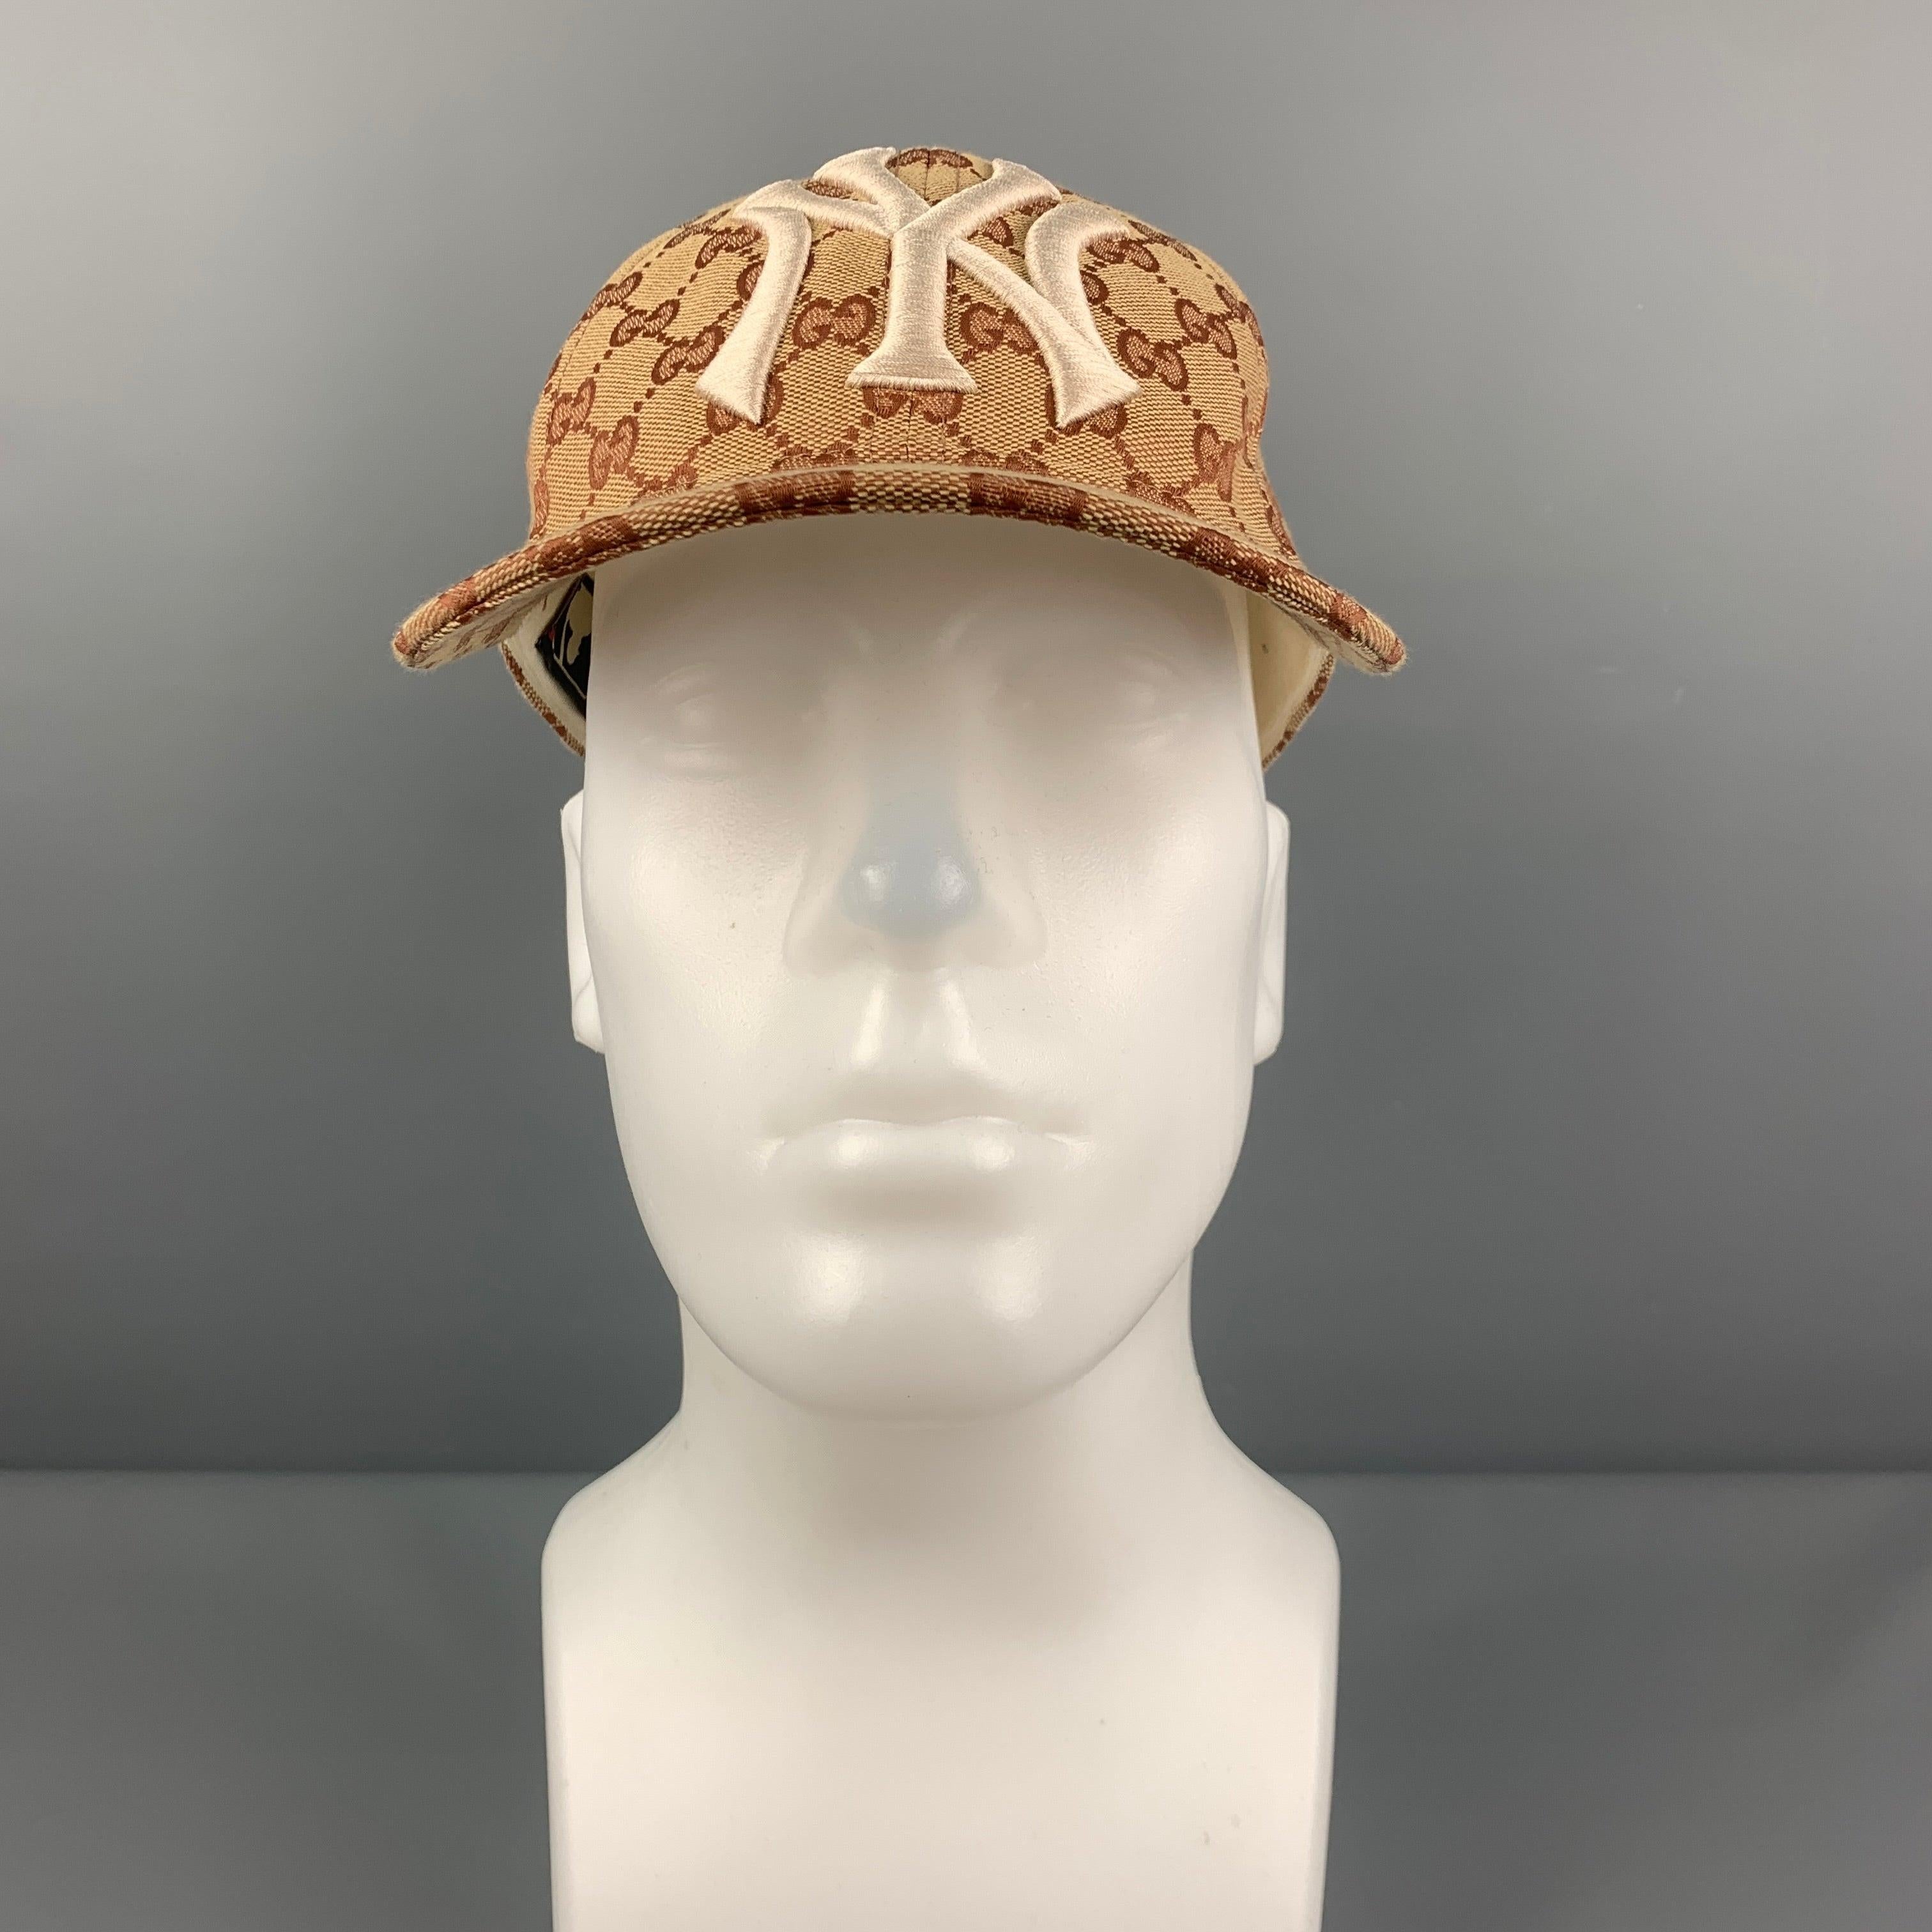 GUCCI cap comes in a khaki & tan 'GG' monogram print canvas featuring a embroidered NY Yankees logo and a adjustable back strap closure. Comes with dust bag. Made in Italy.
 Very Good
 Pre-Owned Condition. Moderate discoloration at interior.  
 

